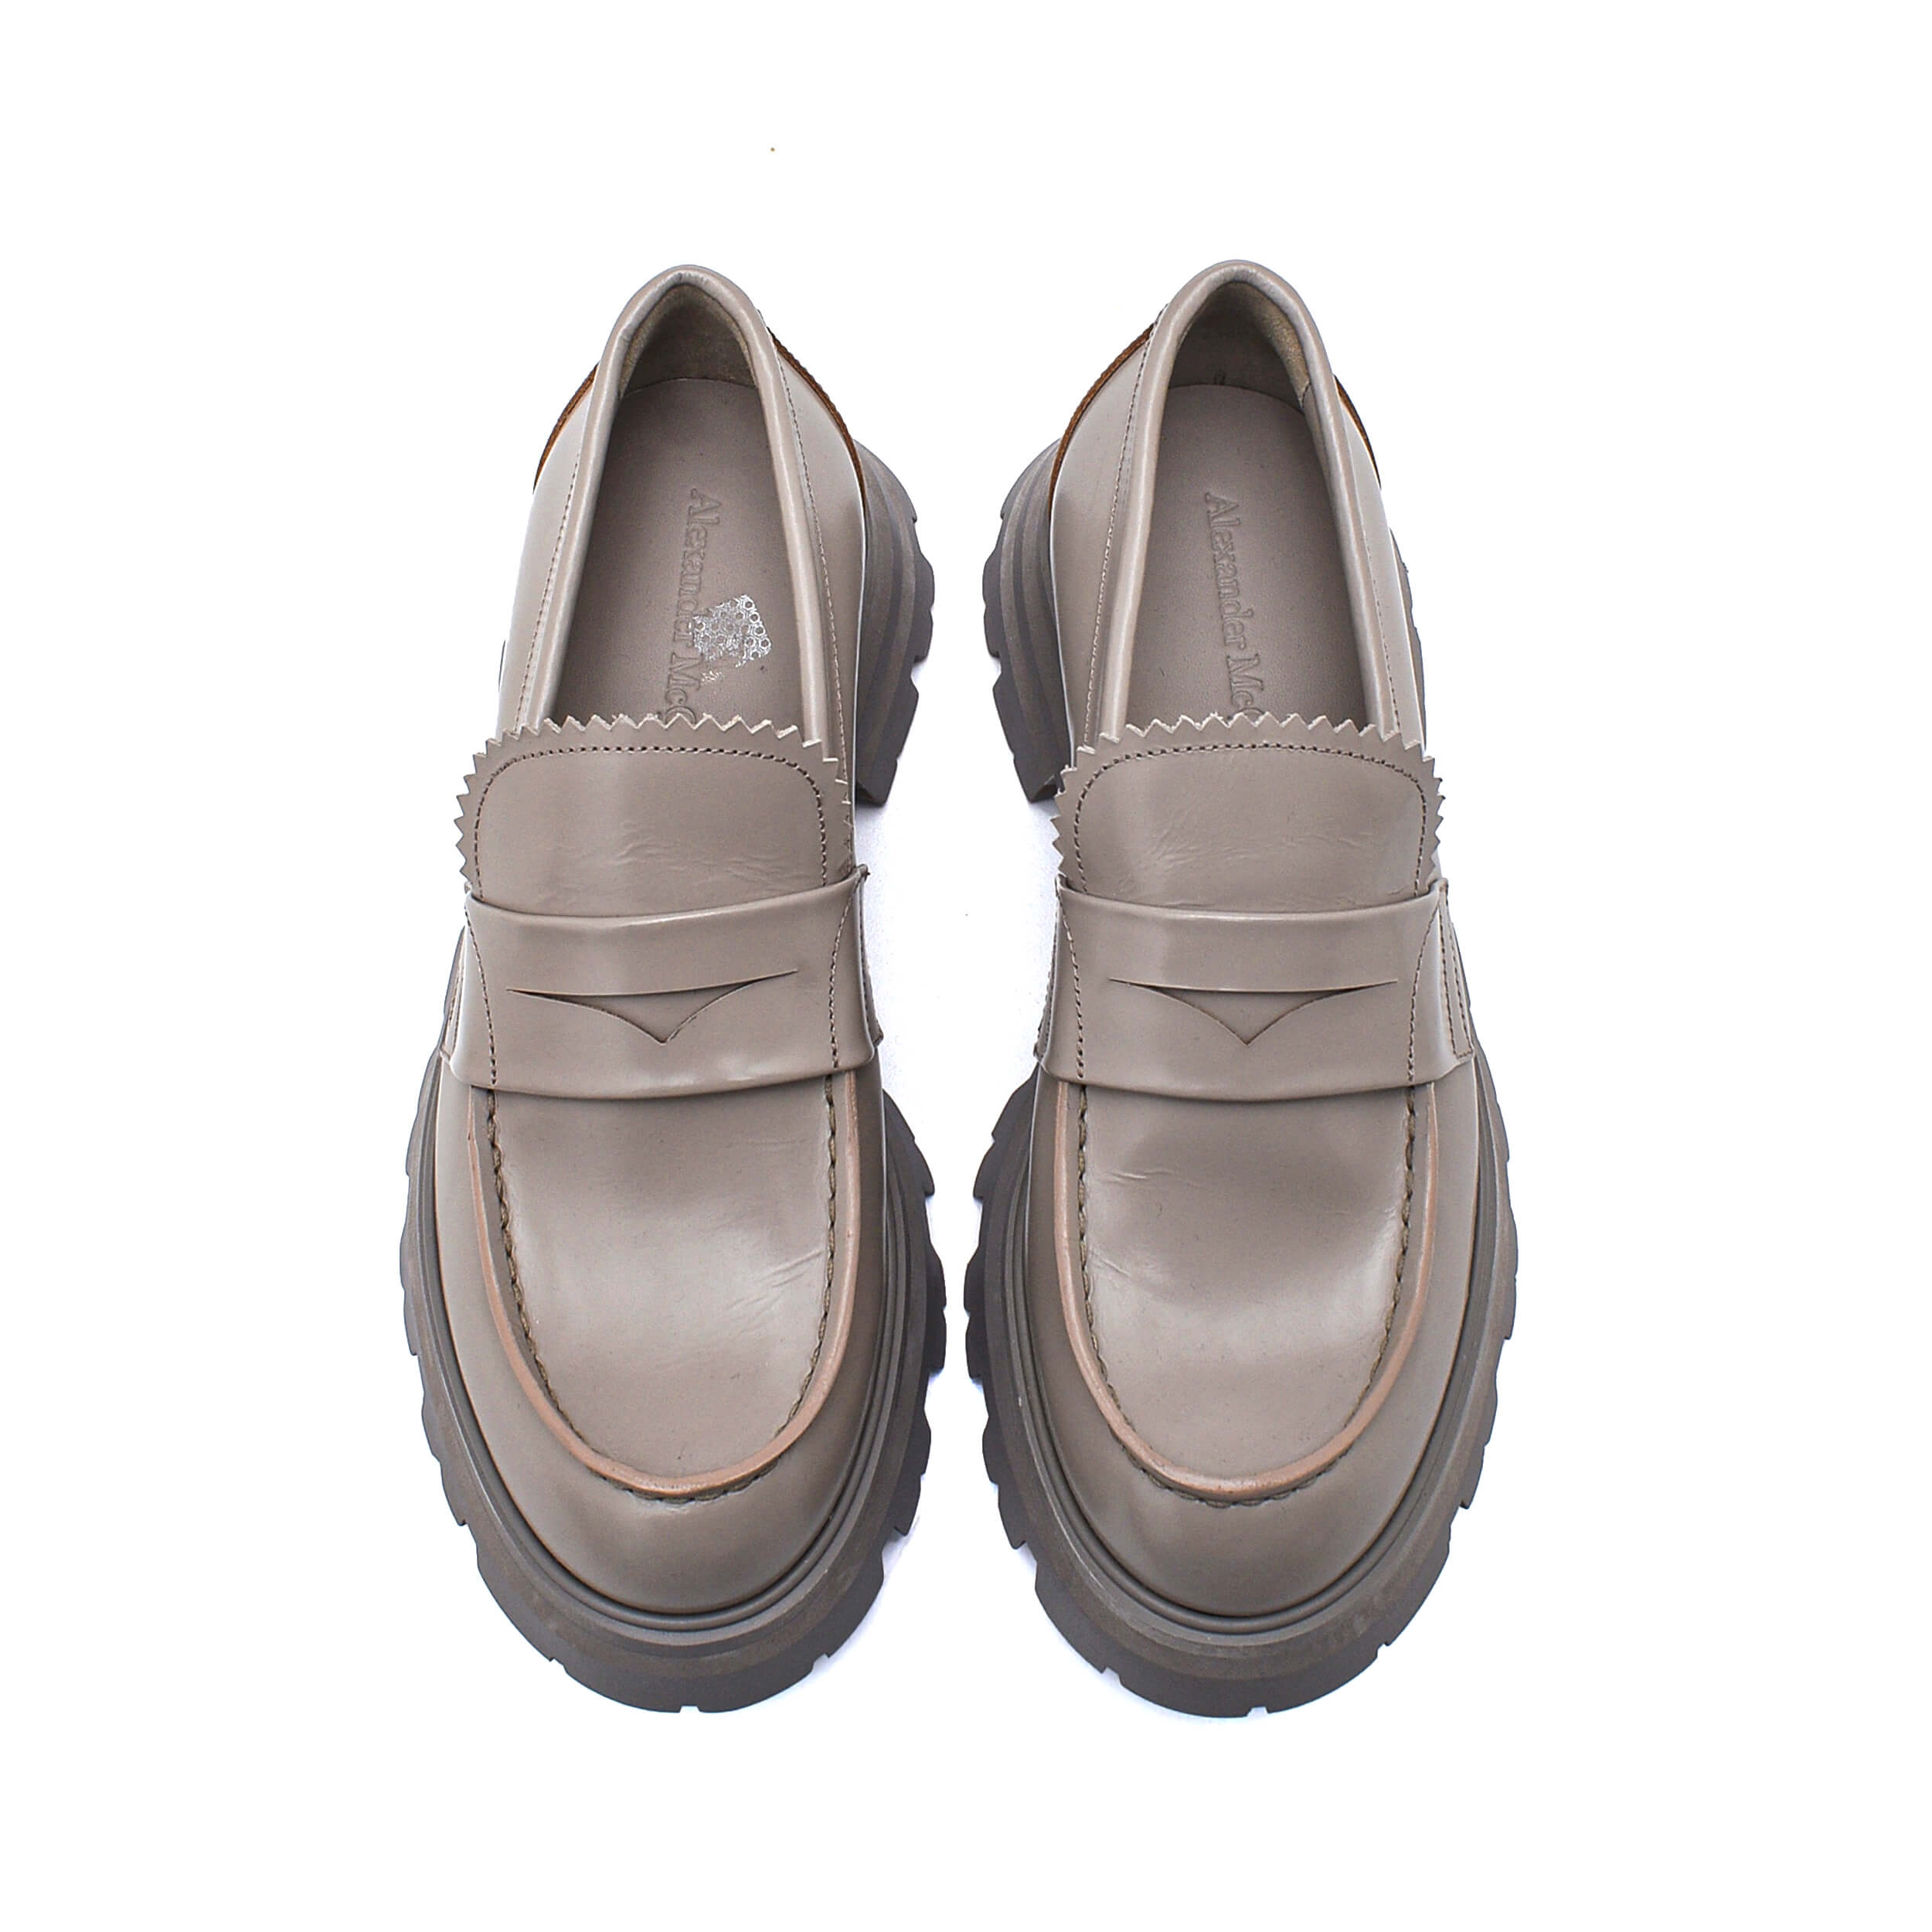 Alexander McQueen - Stone Shiny Leather Loafers / 38